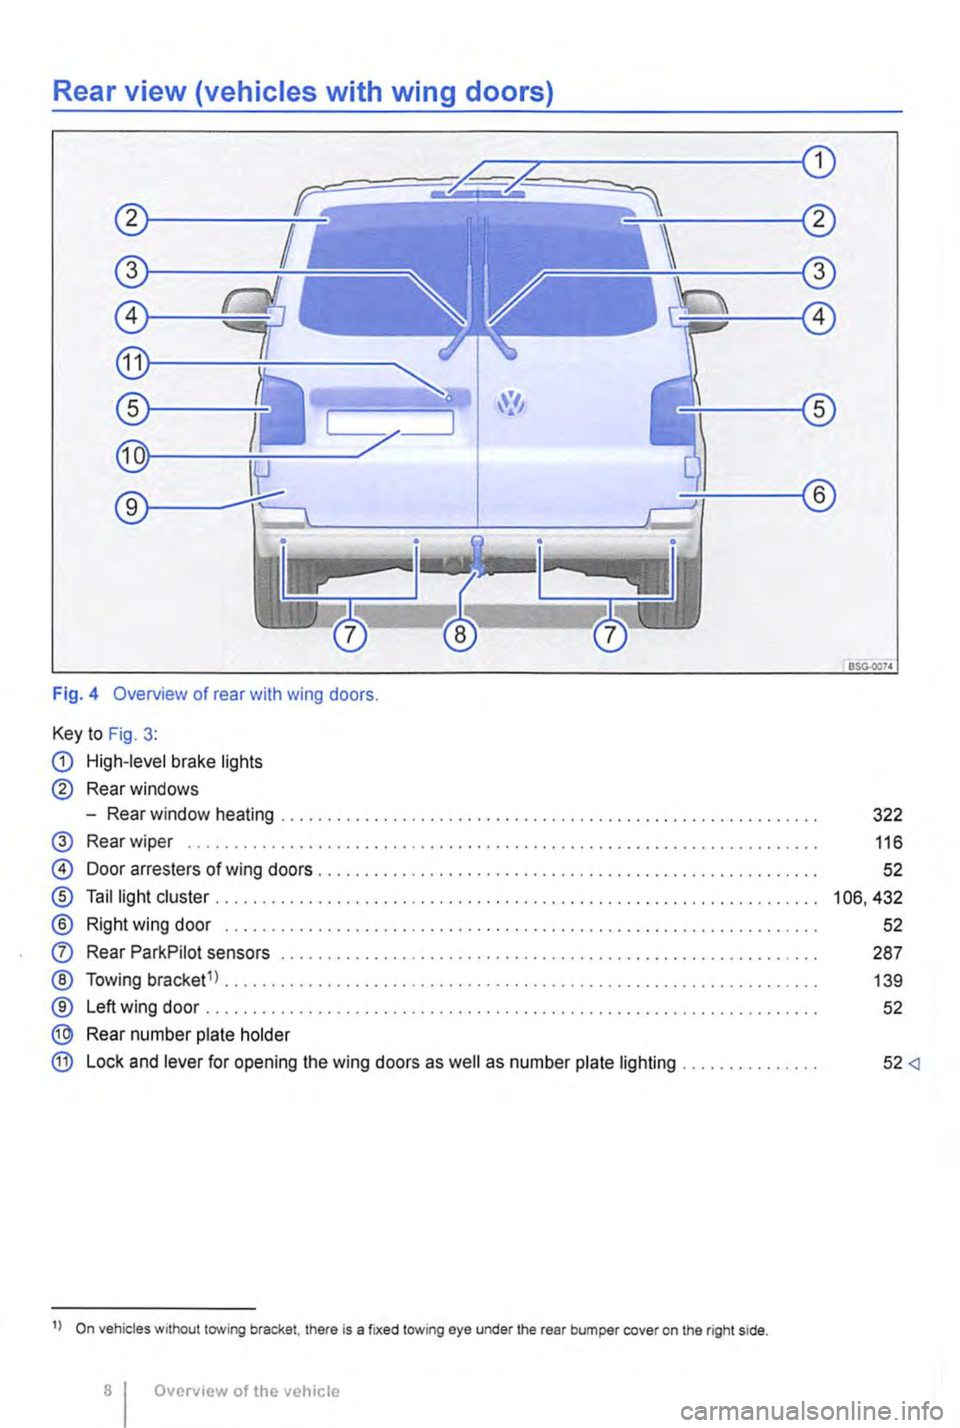 VOLKSWAGEN TRANSPORTER 2013  Owners Manual Rear view (vehicles with wing doors) 
Fig. 4 Overview of rear with wing doors. 
Key to Fig. 3: 
G) High-level brake lights 
® Rear windows 
-Rear window heating ......................................